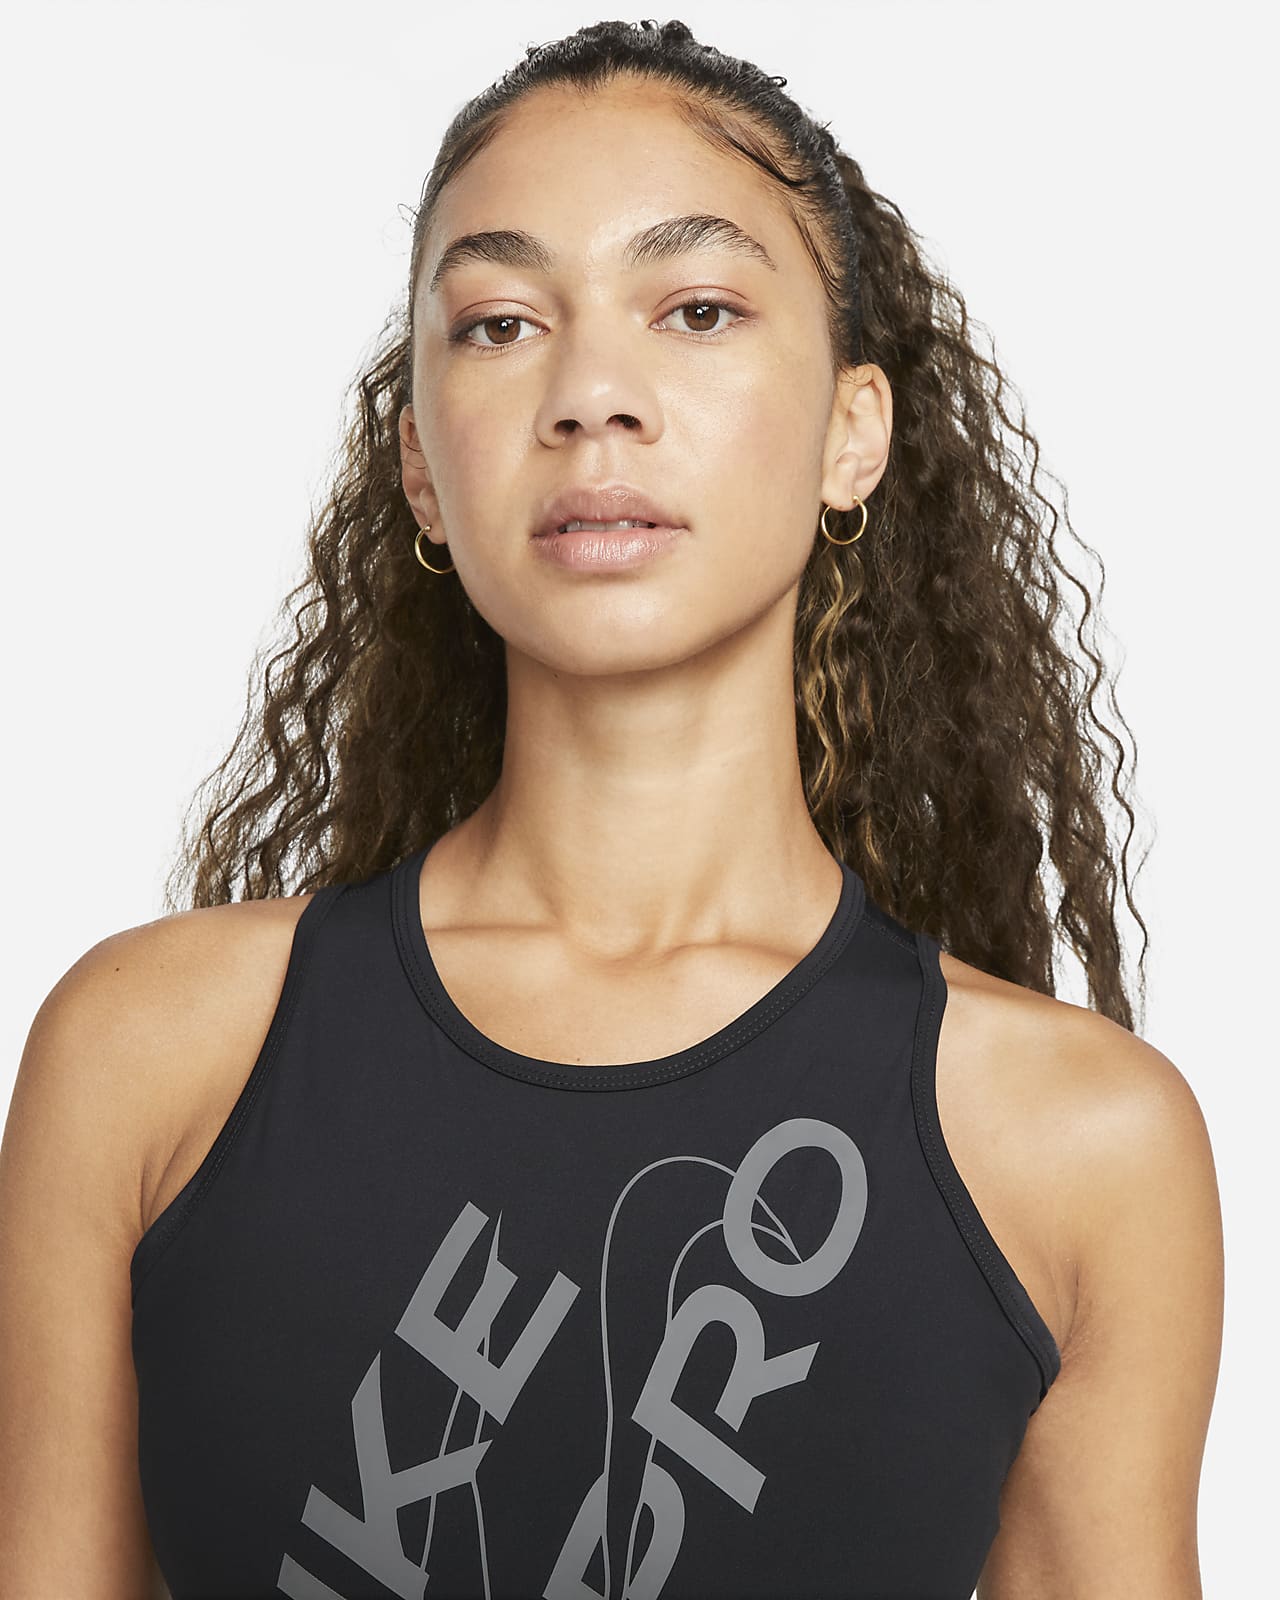 Nike Women's Dri-Fit Infinite Tank Top BV3909 500 Size Small Retail $65 New  with tag